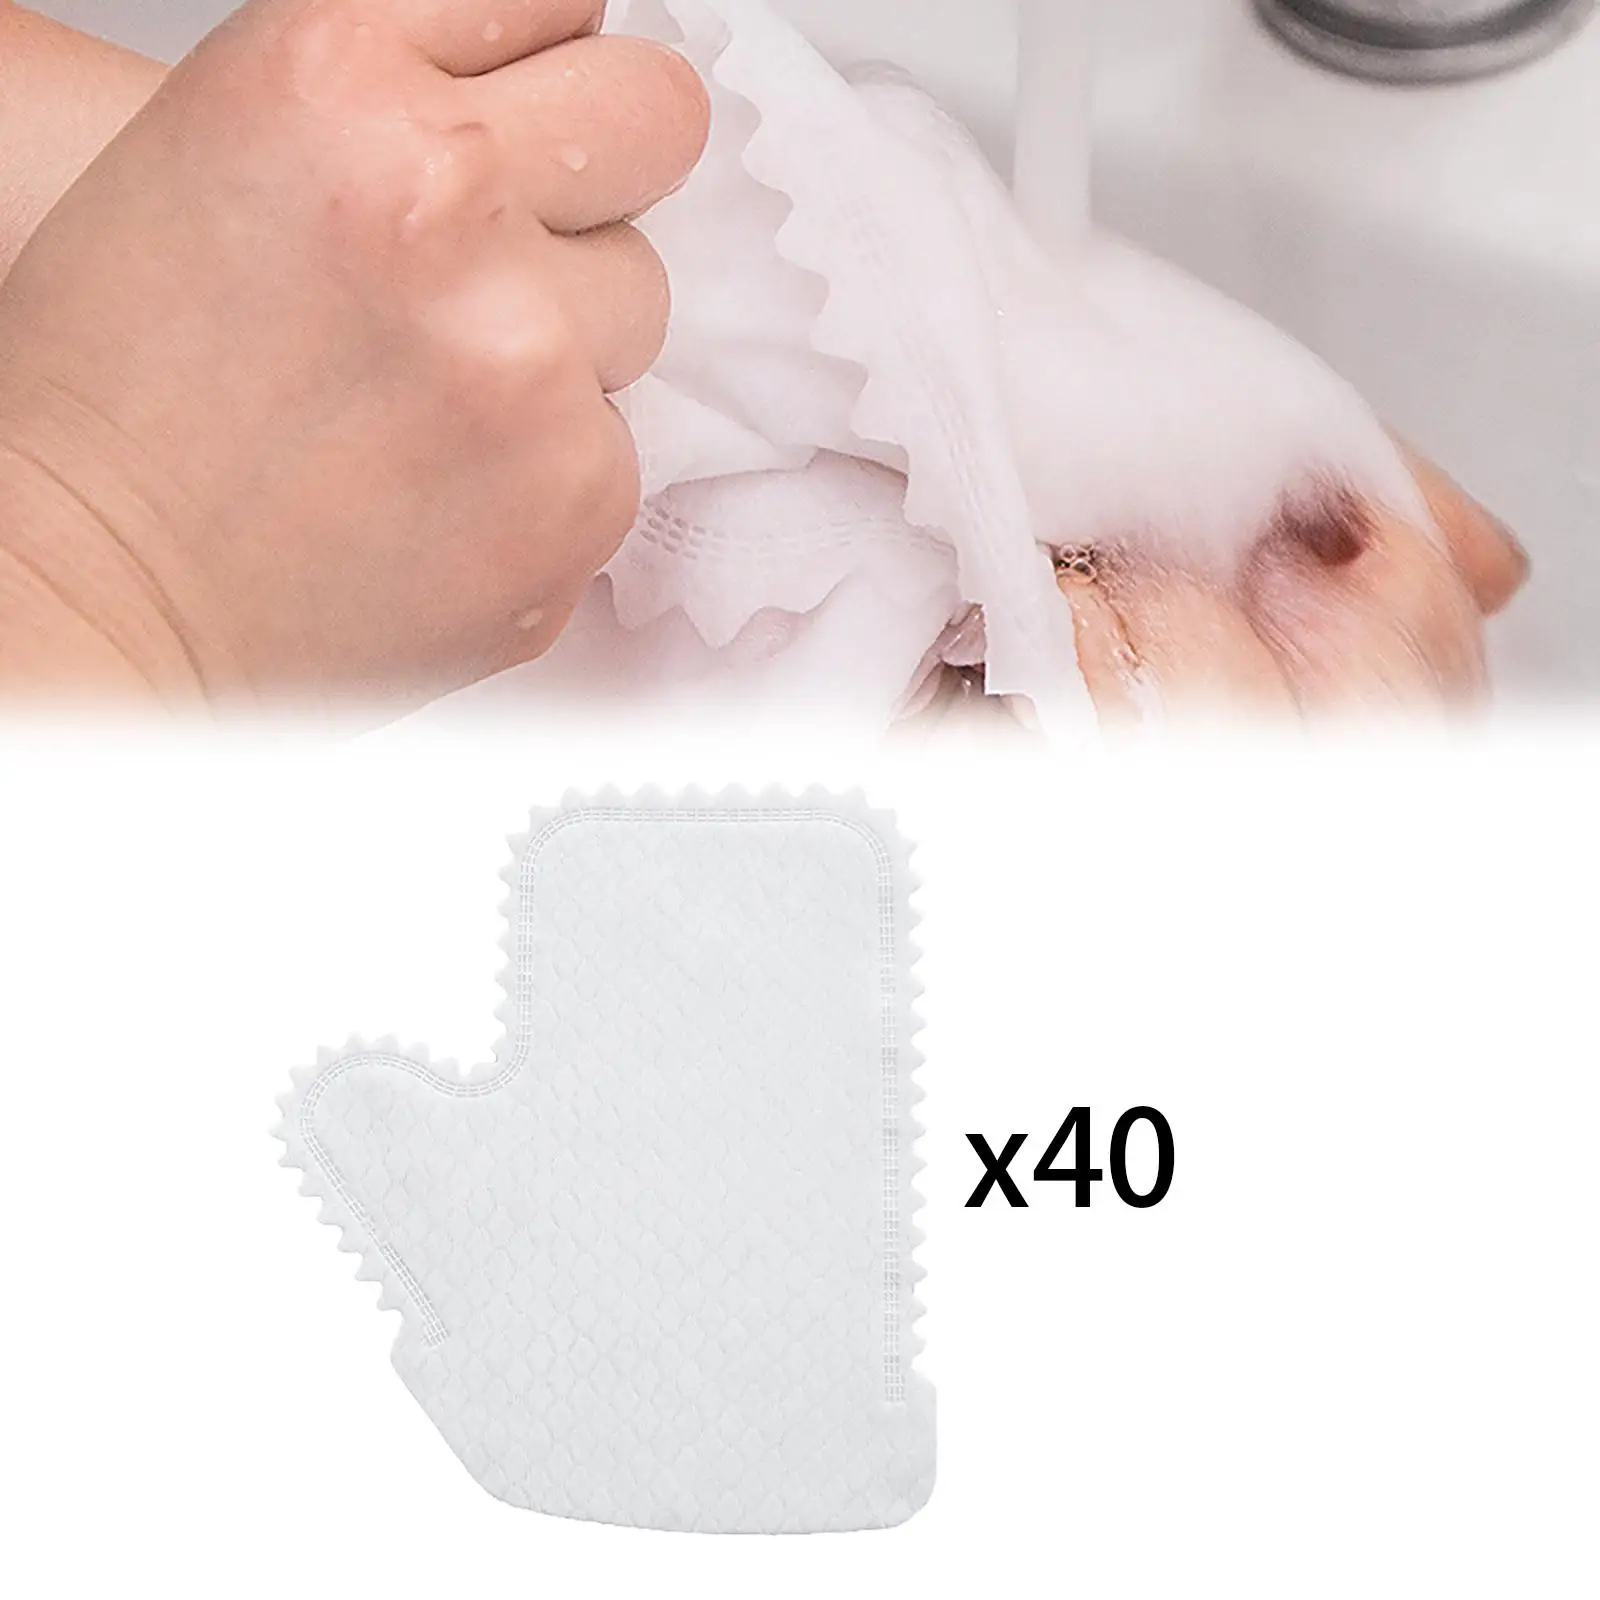 40 Pieces Dusting Cloths Gloves, Non-Woven Dust , Pet Hair Cleaning Dusting Gloves, Reusable, One Size 